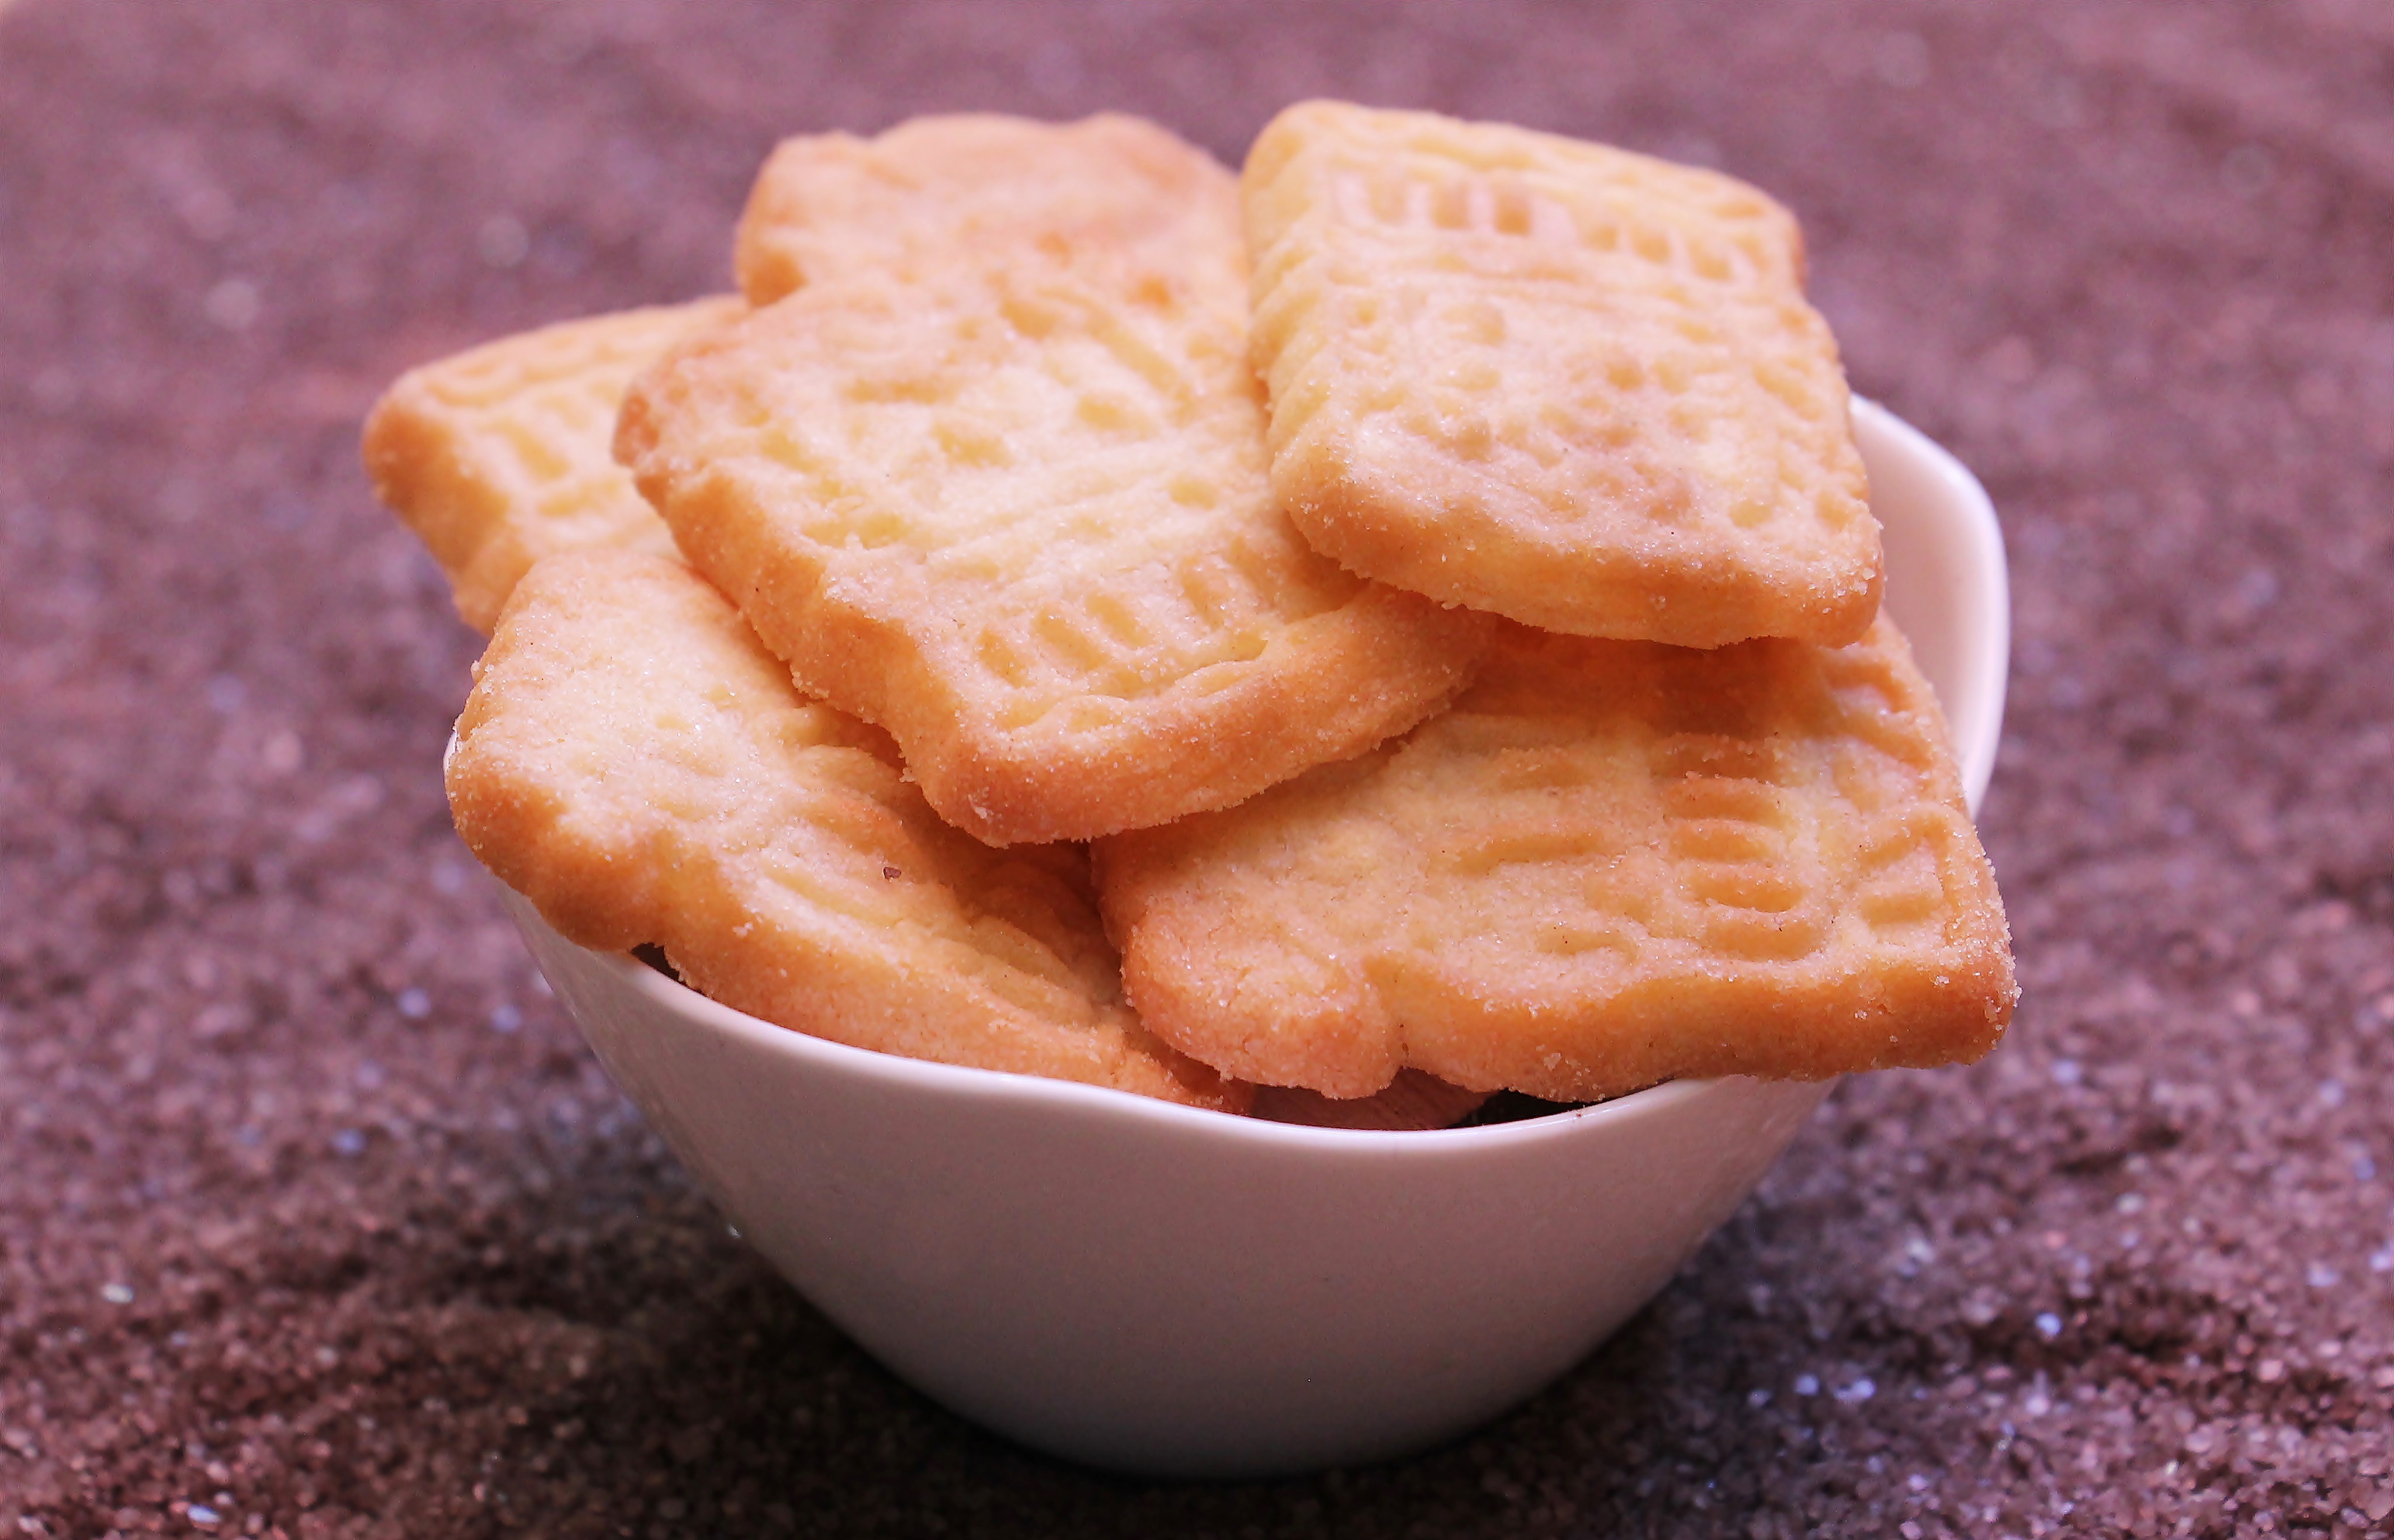 Baked biscuits photo